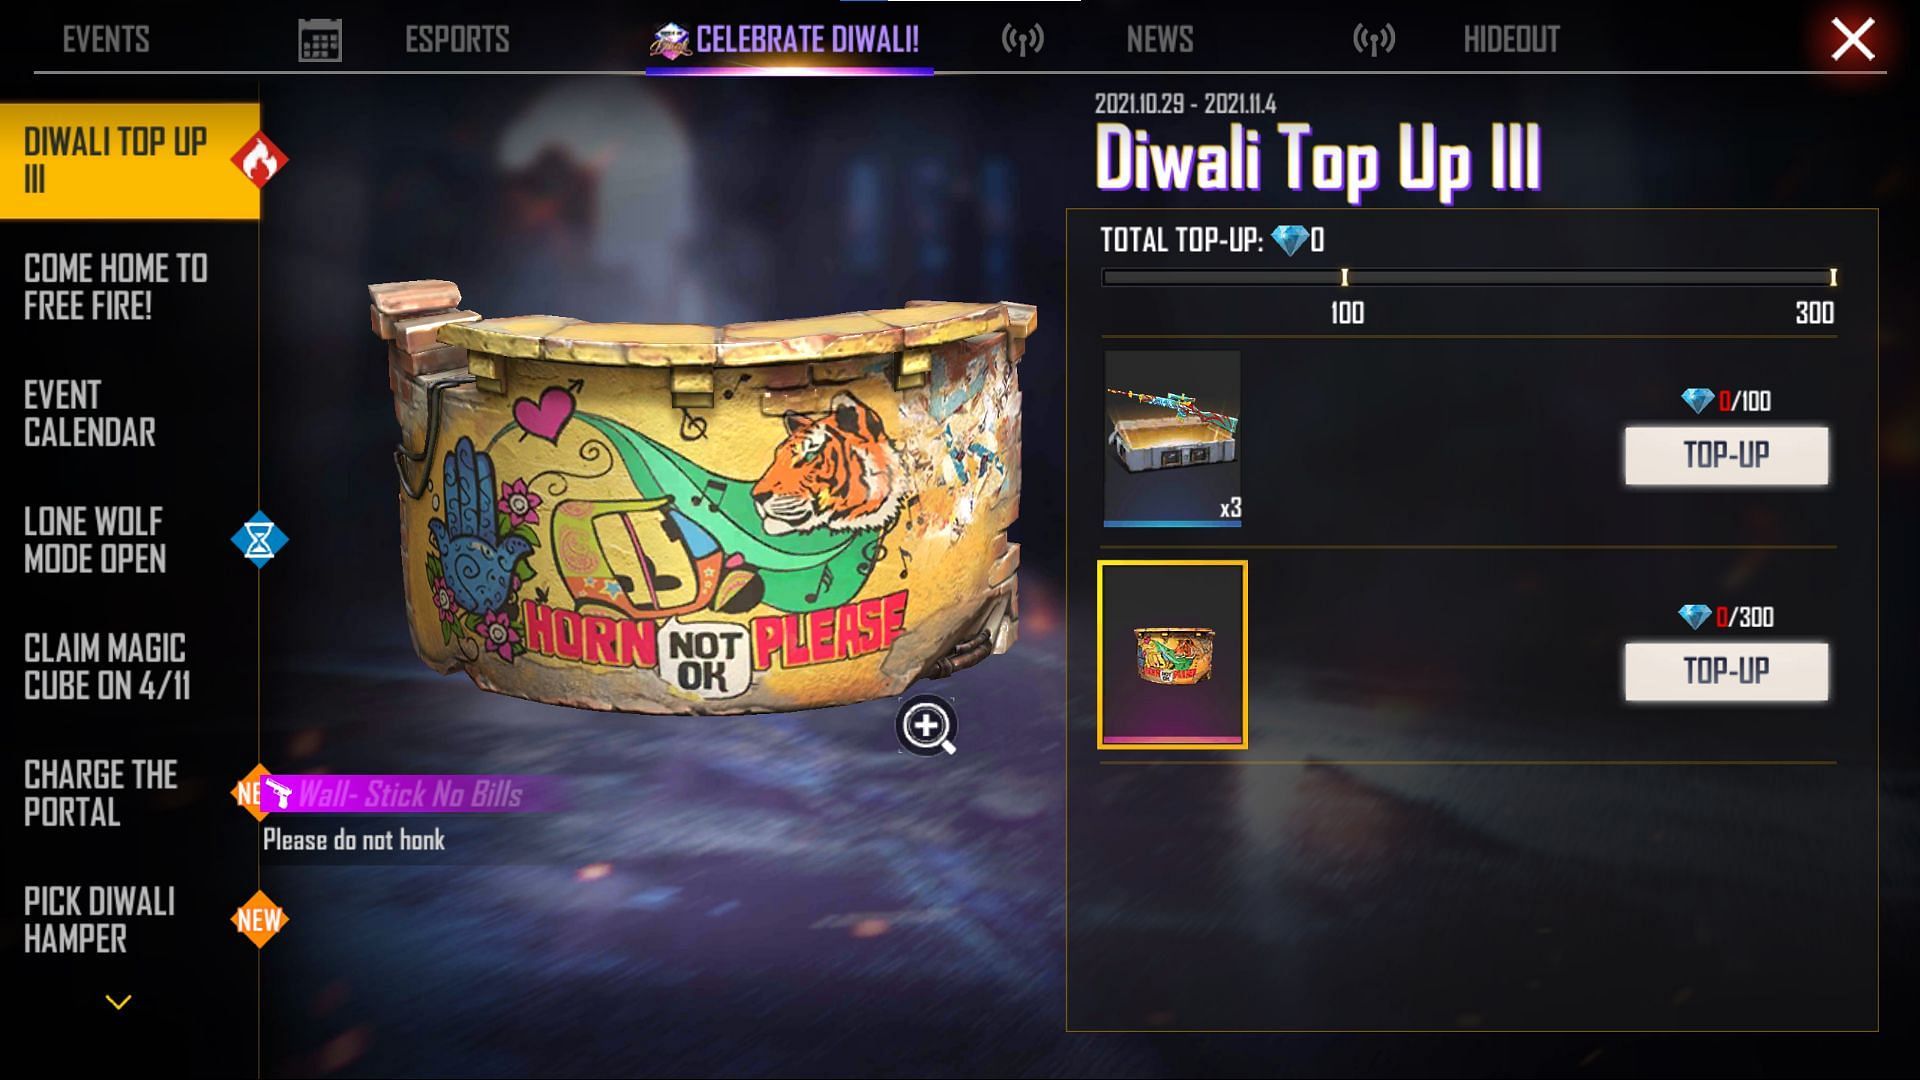 Upon purchasing 300 diamonds, players will get the Gloo Wall skin (Image via Free Fire)